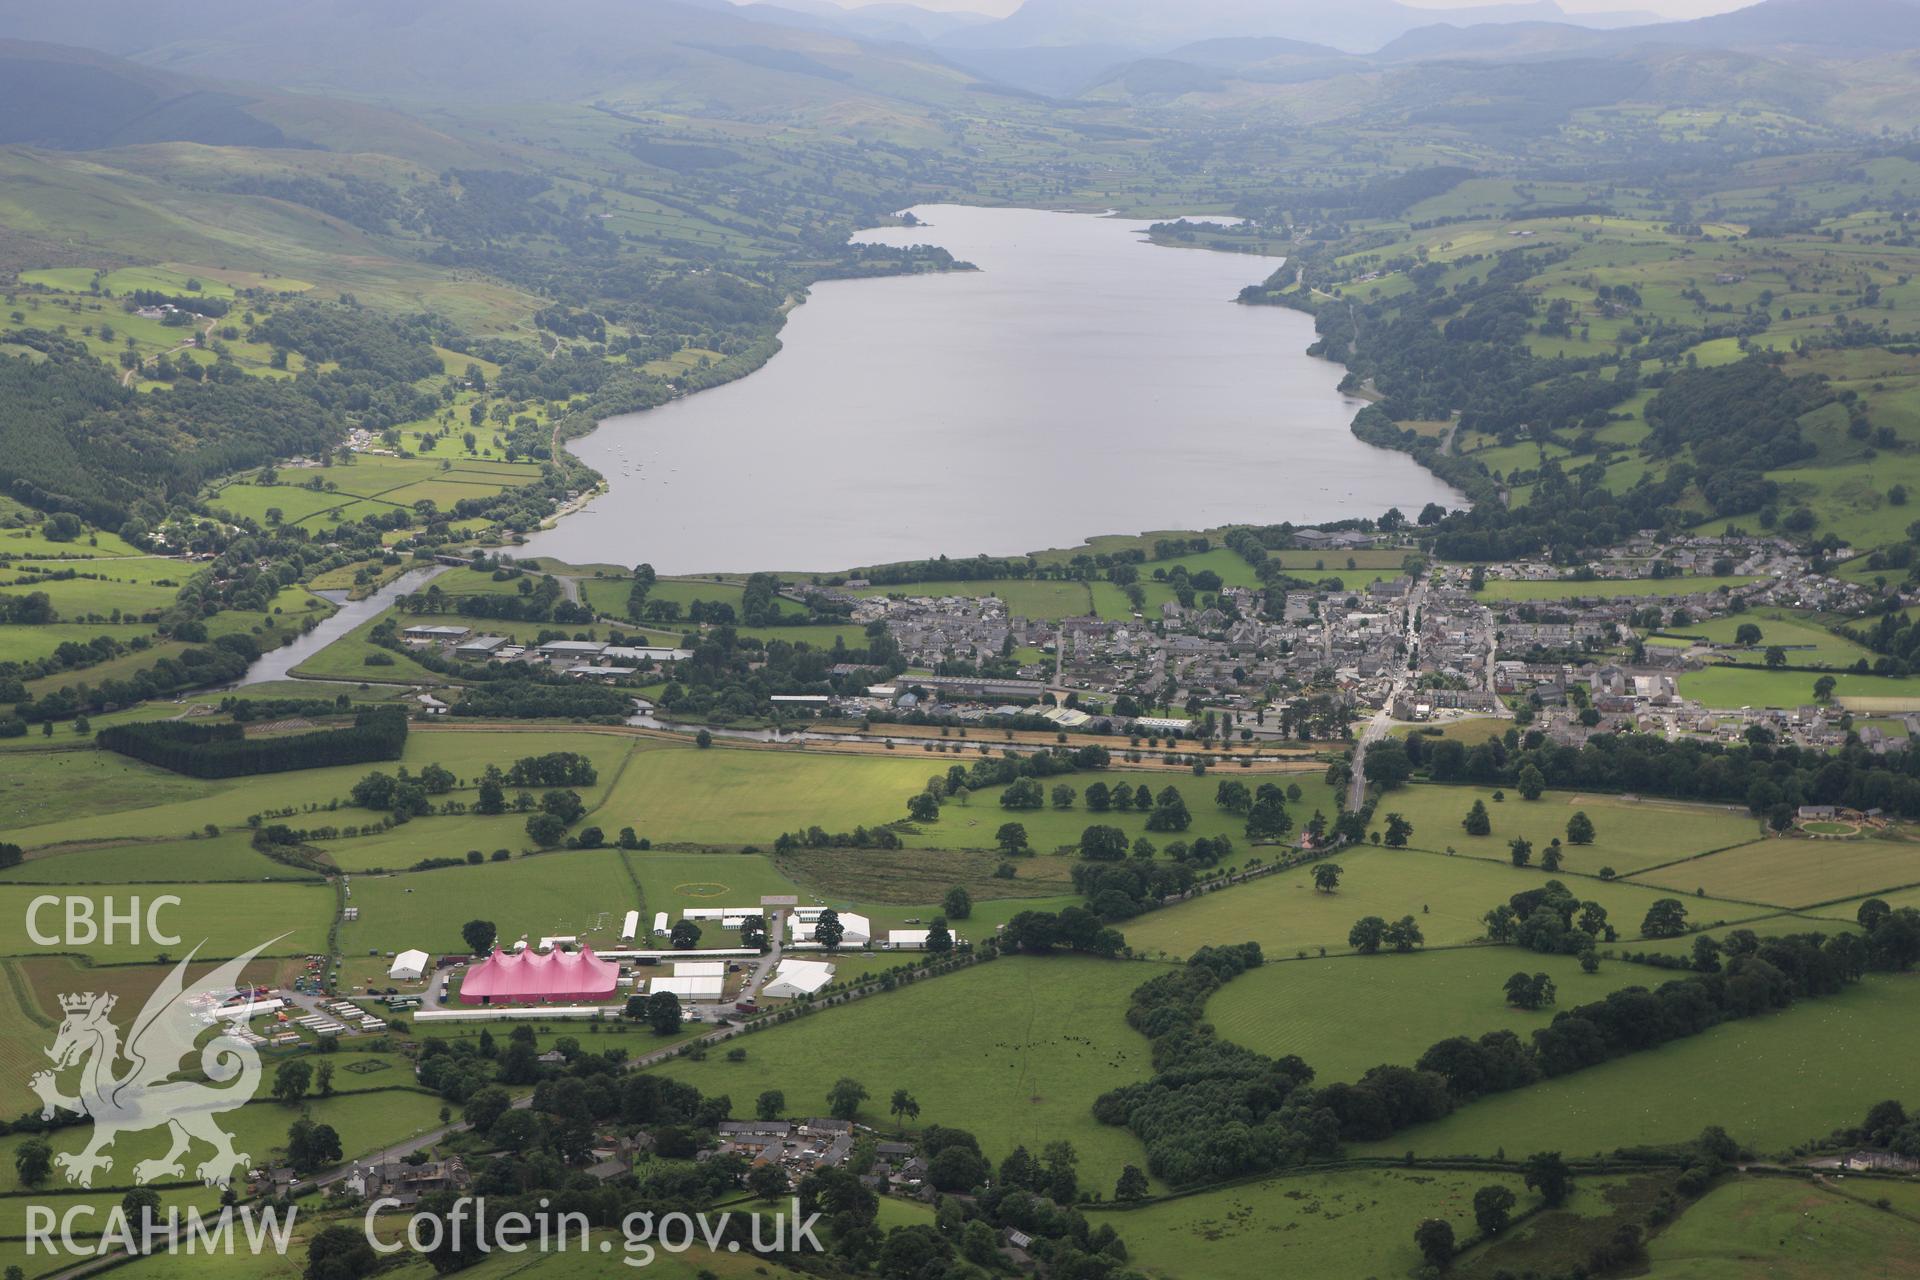 RCAHMW colour oblique aerial photograph of Llyn Tegid (Bala Lake) and Eisteddfod, viewed from the north-east. Taken on 08 July 2009 by Toby Driver